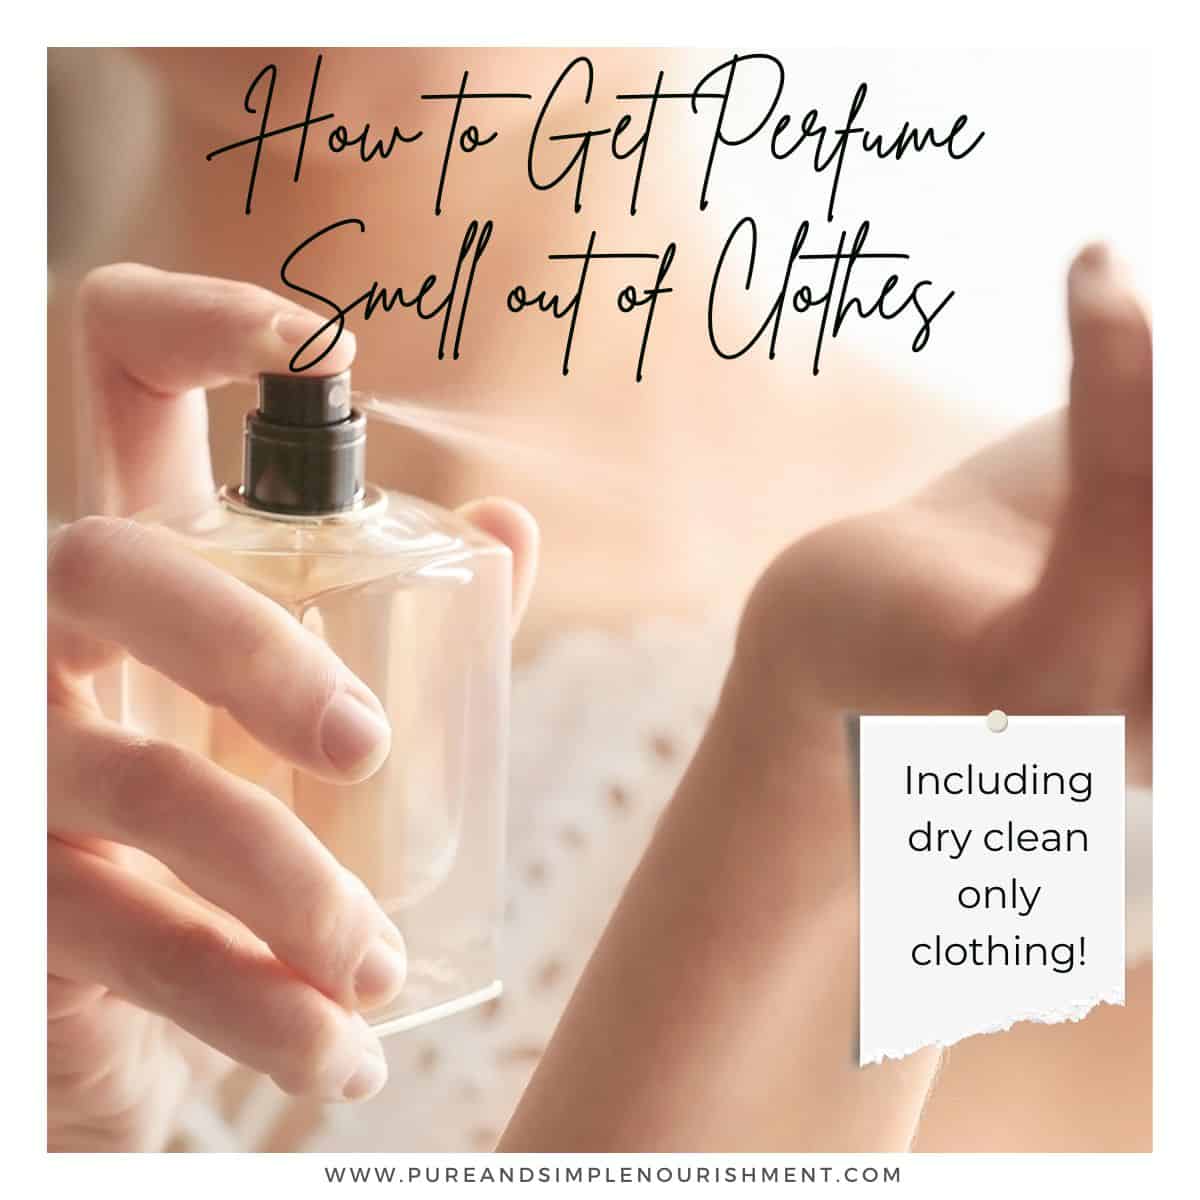 Manager frakke nyheder How to Get Perfume Smell Out of Clothes - Pure and Simple Nourishment